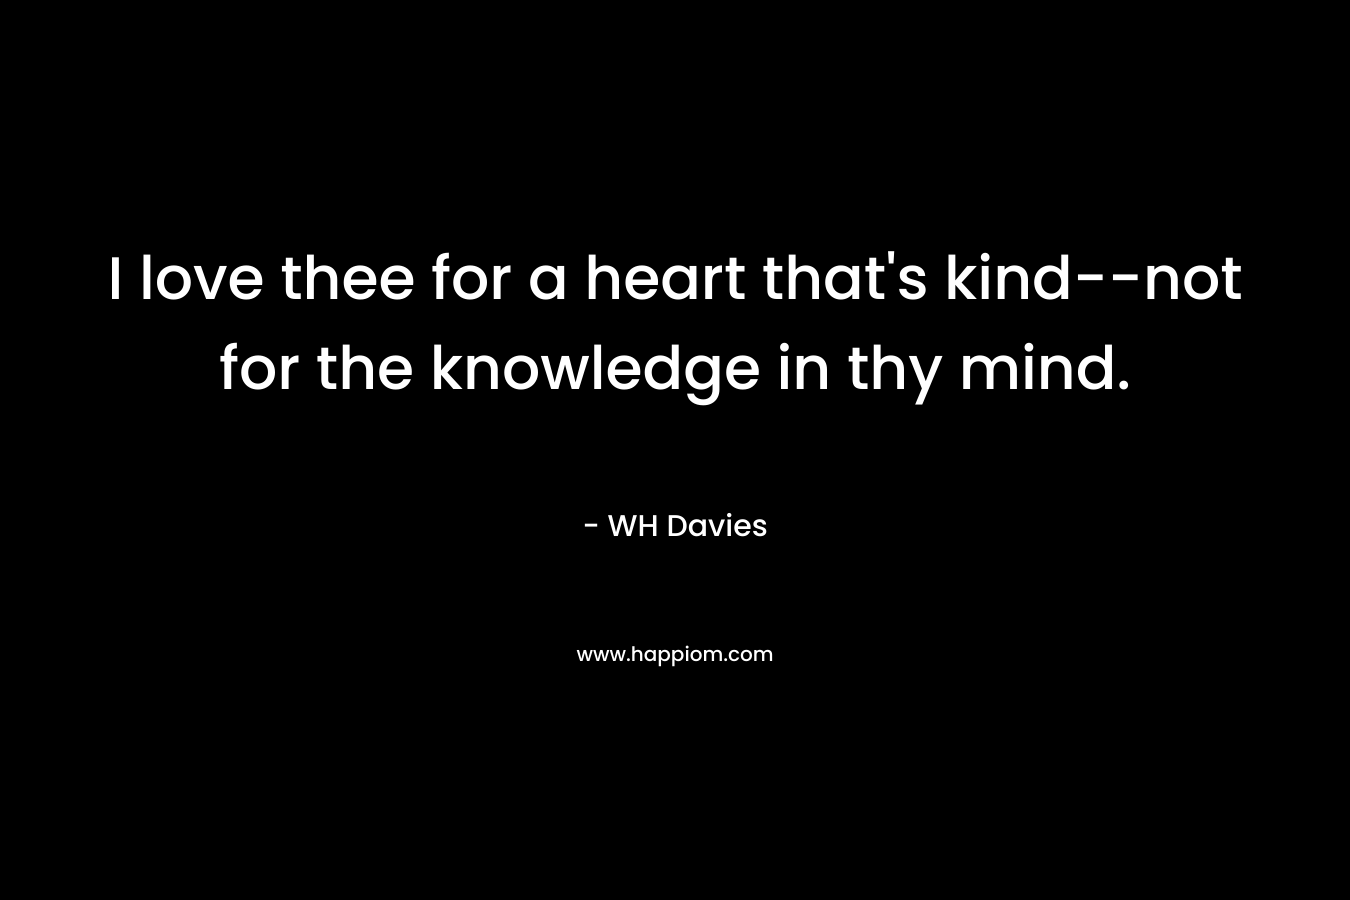 I love thee for a heart that's kind--not for the knowledge in thy mind.